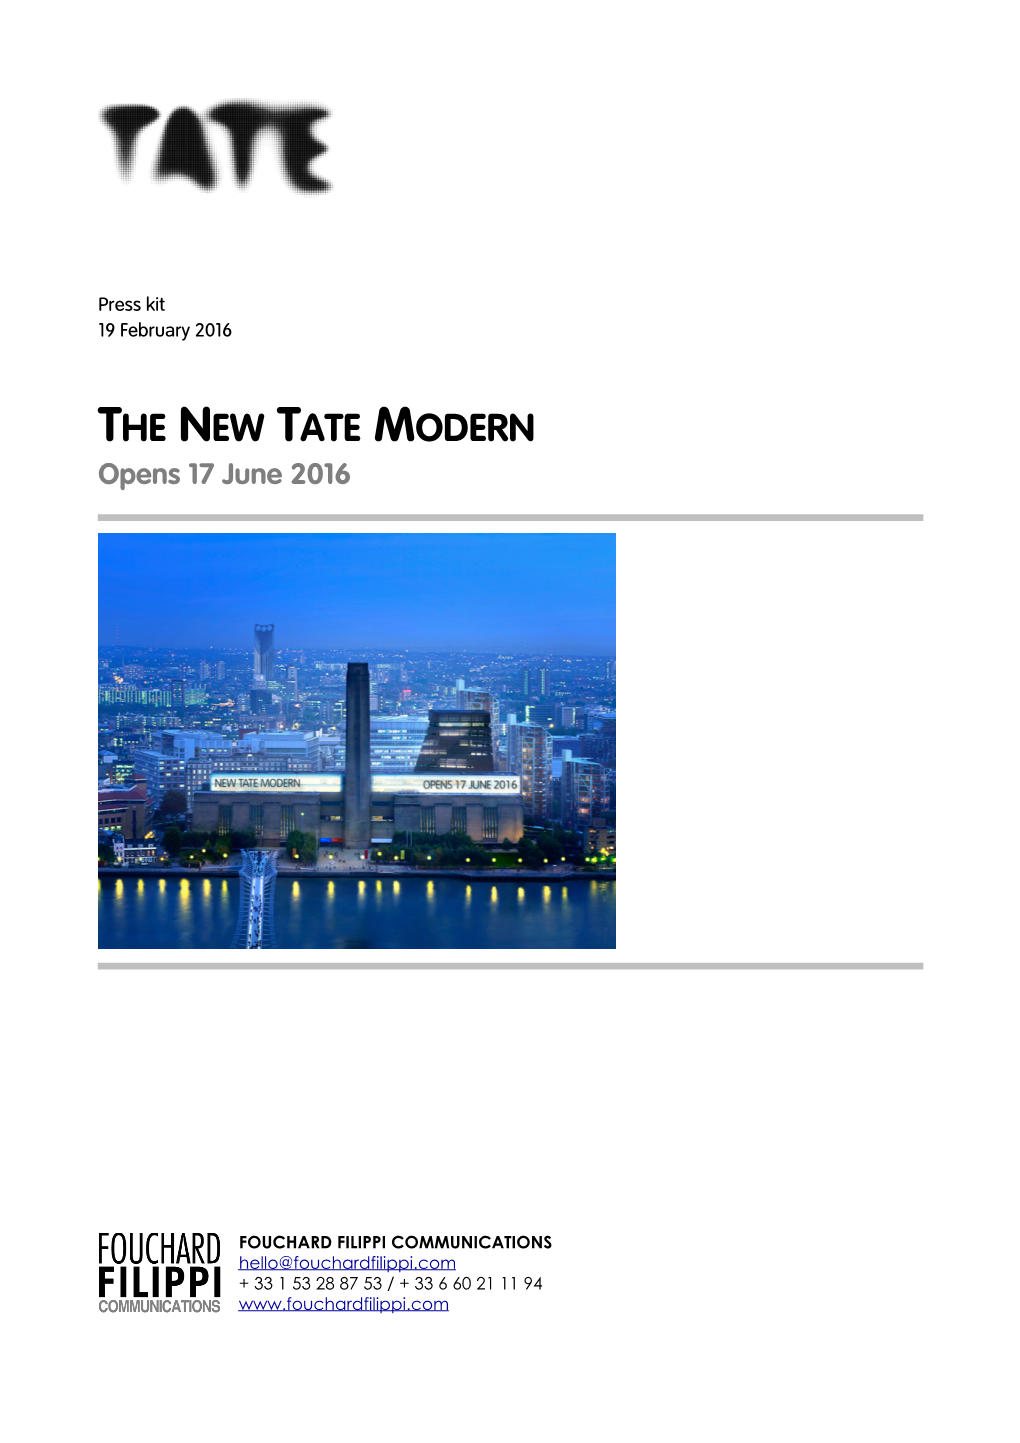 THE NEW TATE MODERN Opens 17 June 2016